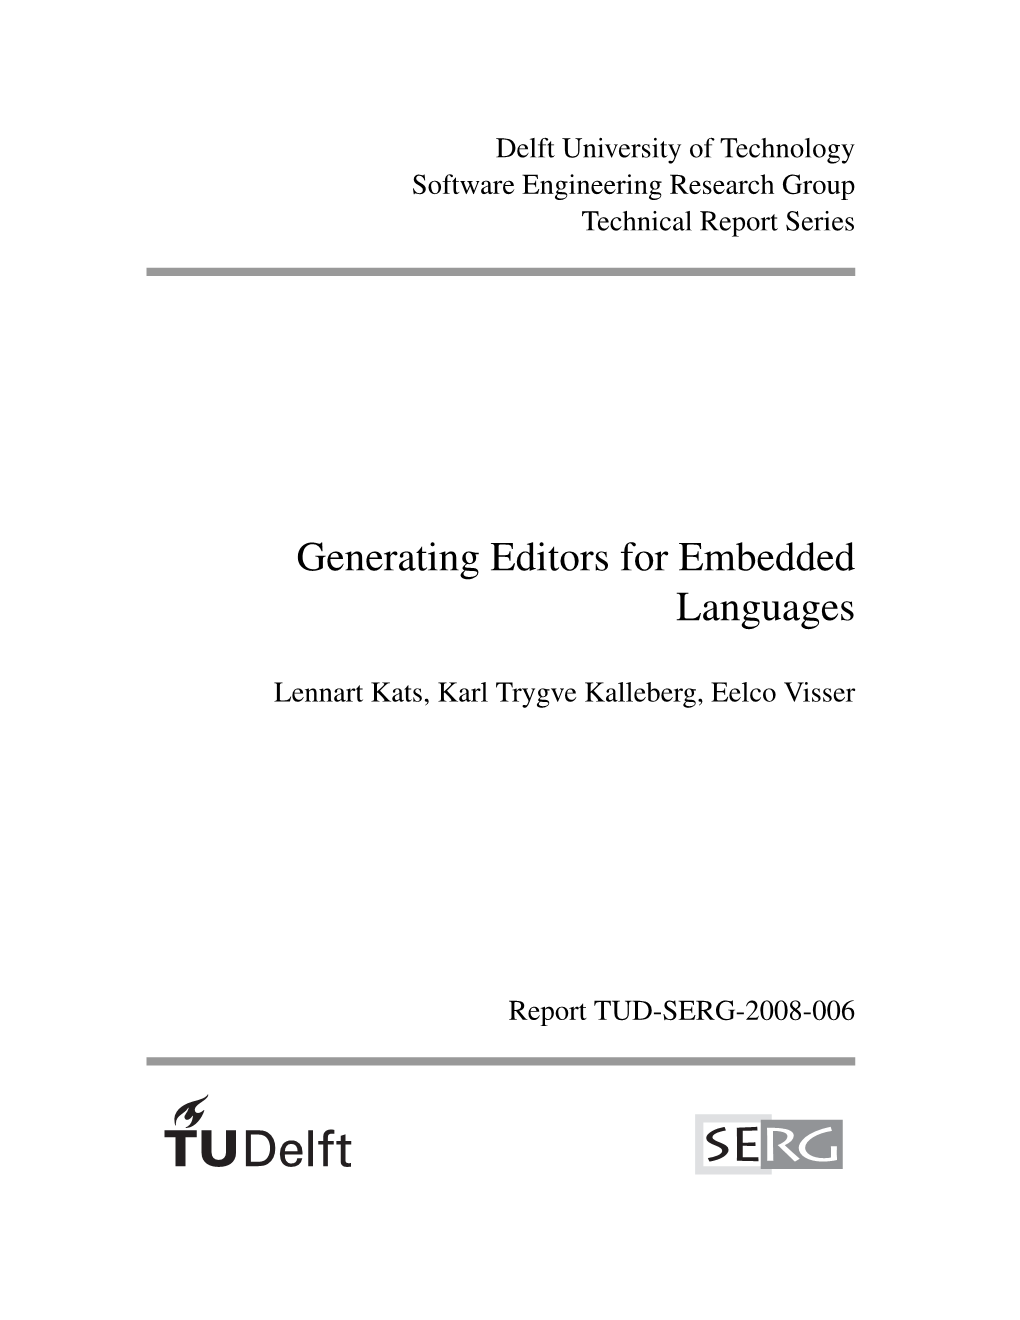 Generating Editors for Embedded Languages